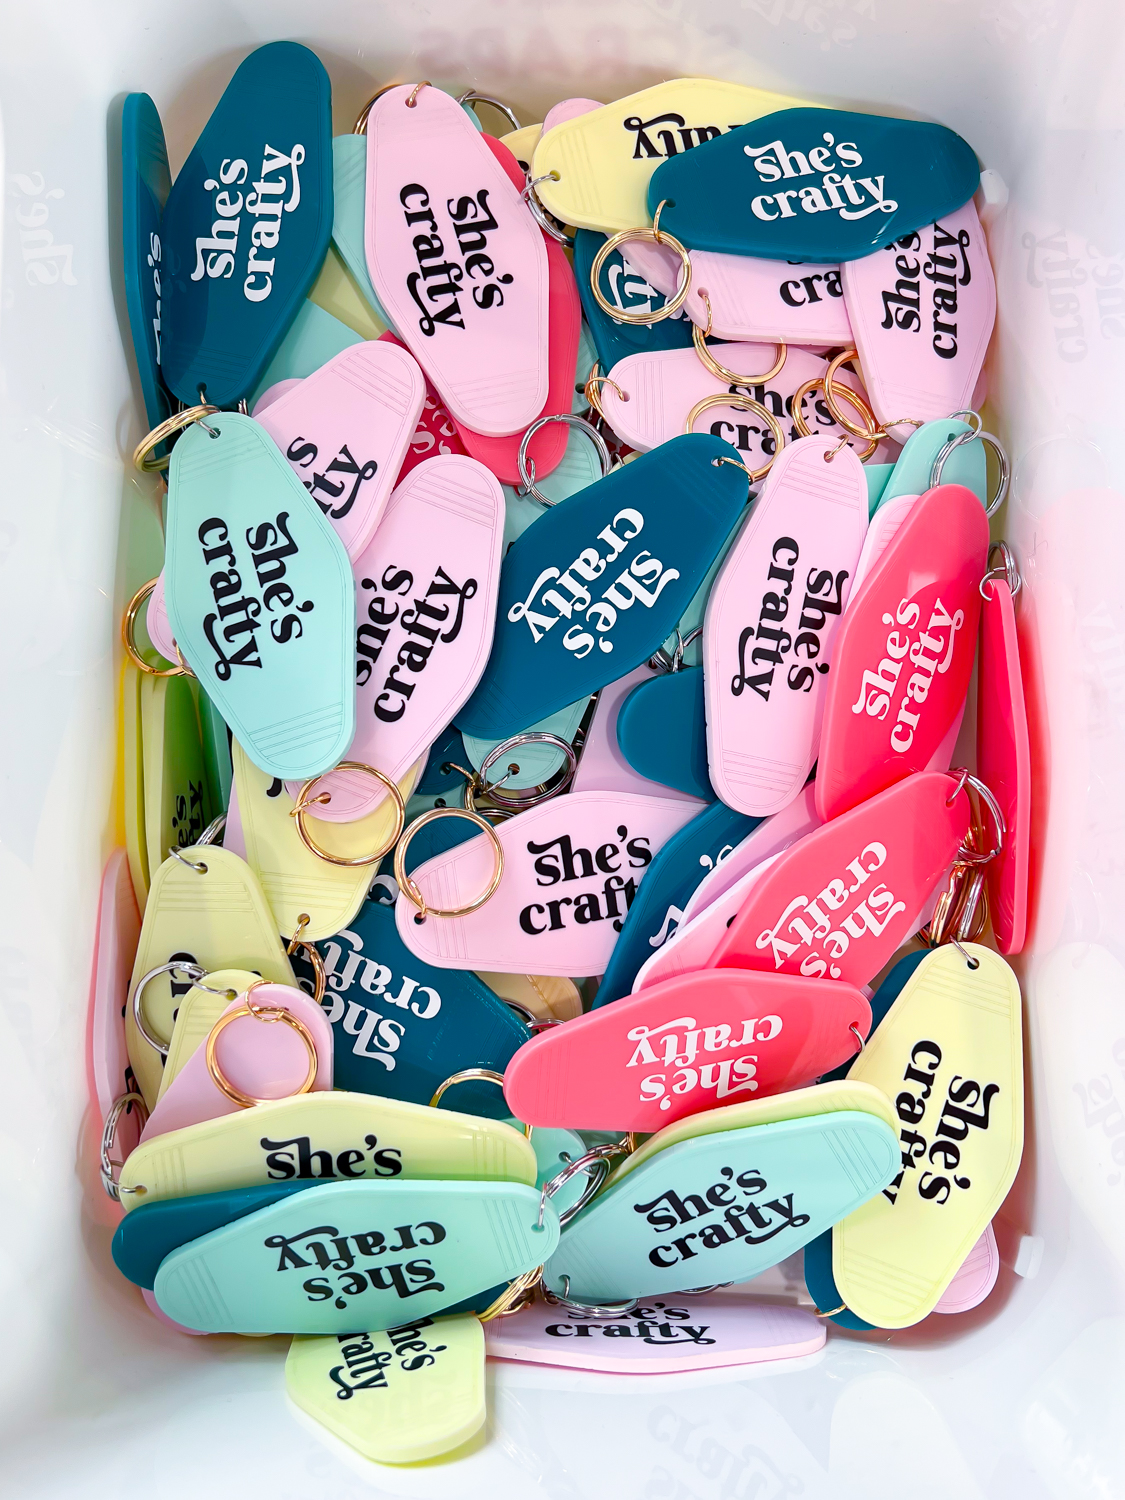 Batching crafts: box of colorful hotel keychains that say "she's crafty" in vinyl